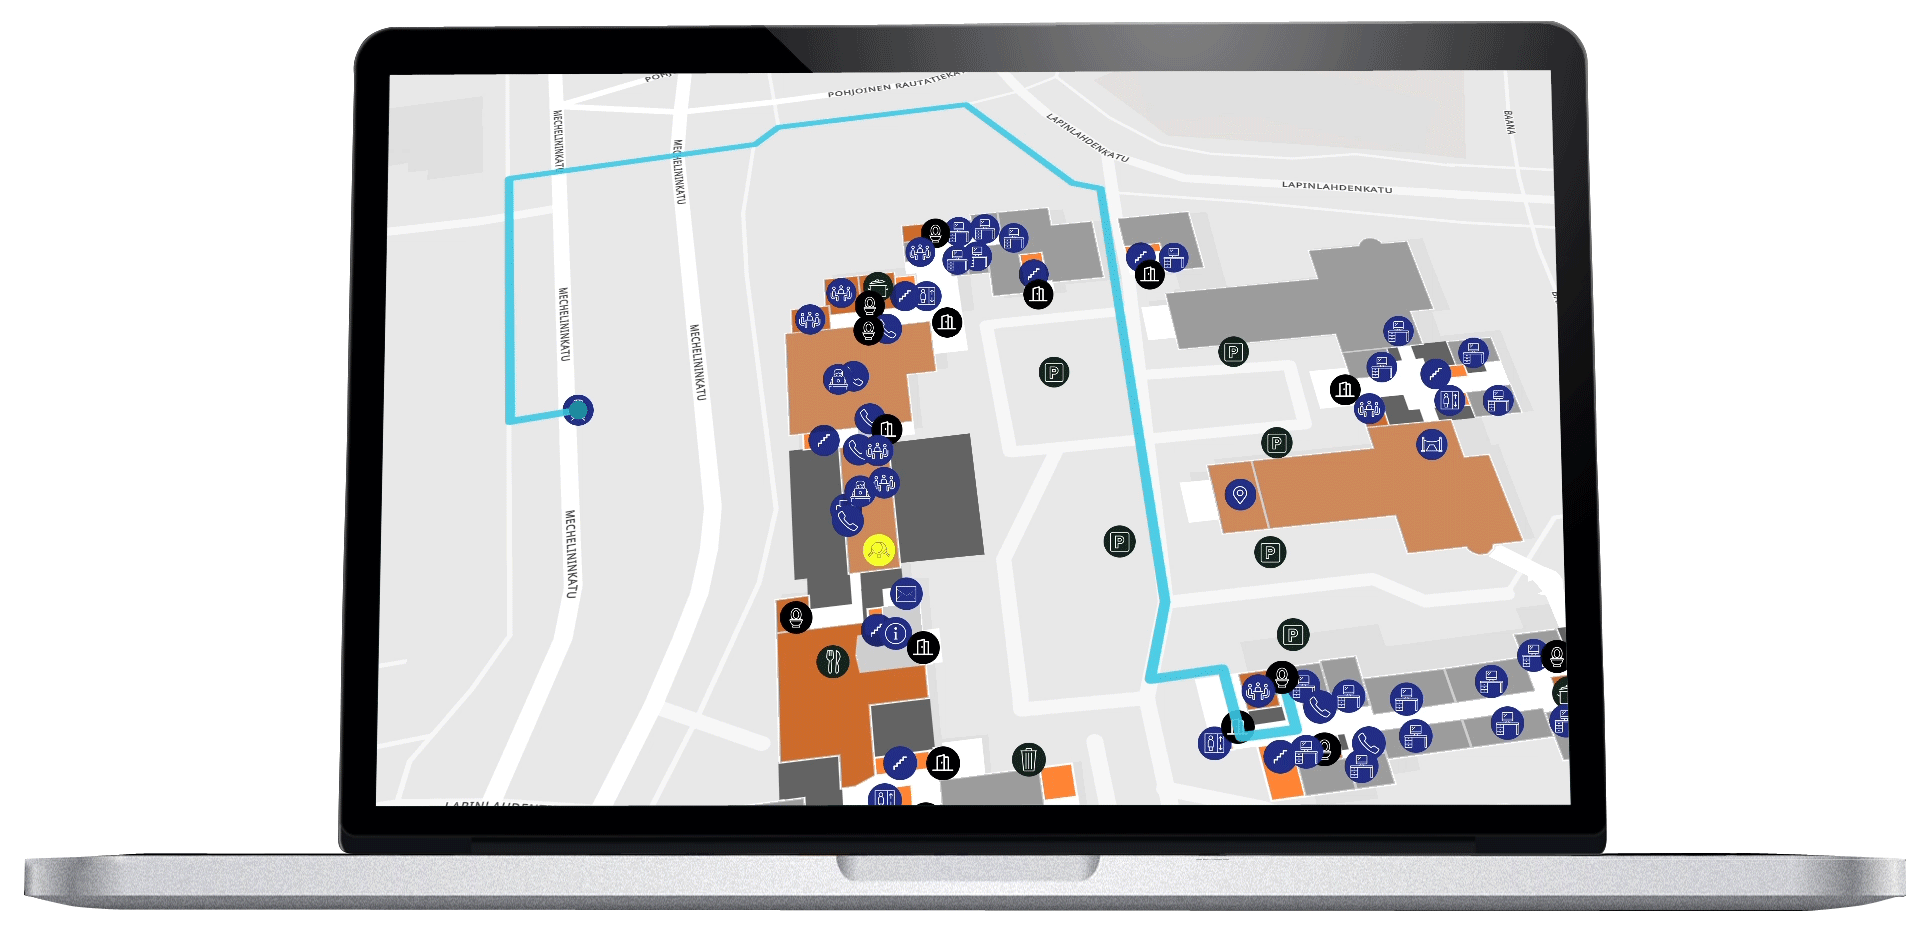 Gif showing a wayfinding route going from inside a building to out to the street and to a tram stop